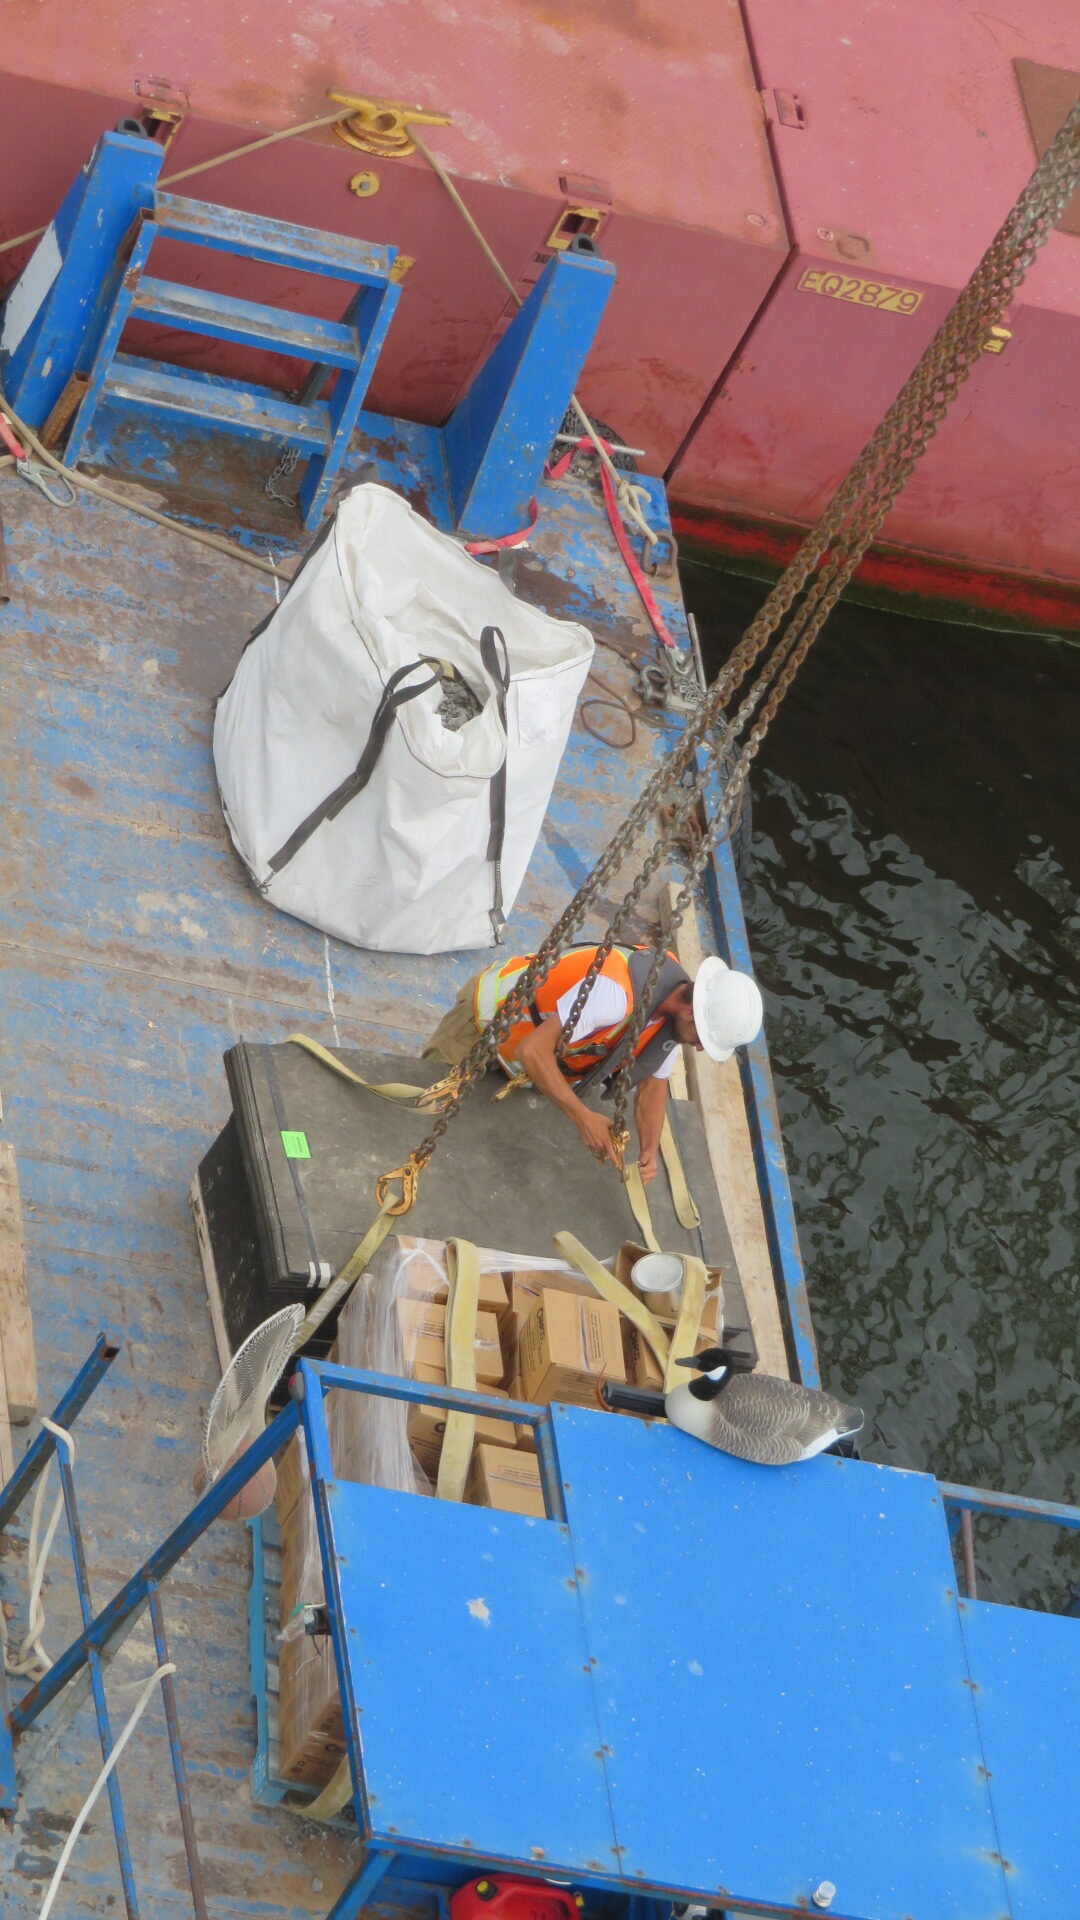 Hooking the protection boards to the crane to be lifted from the boat